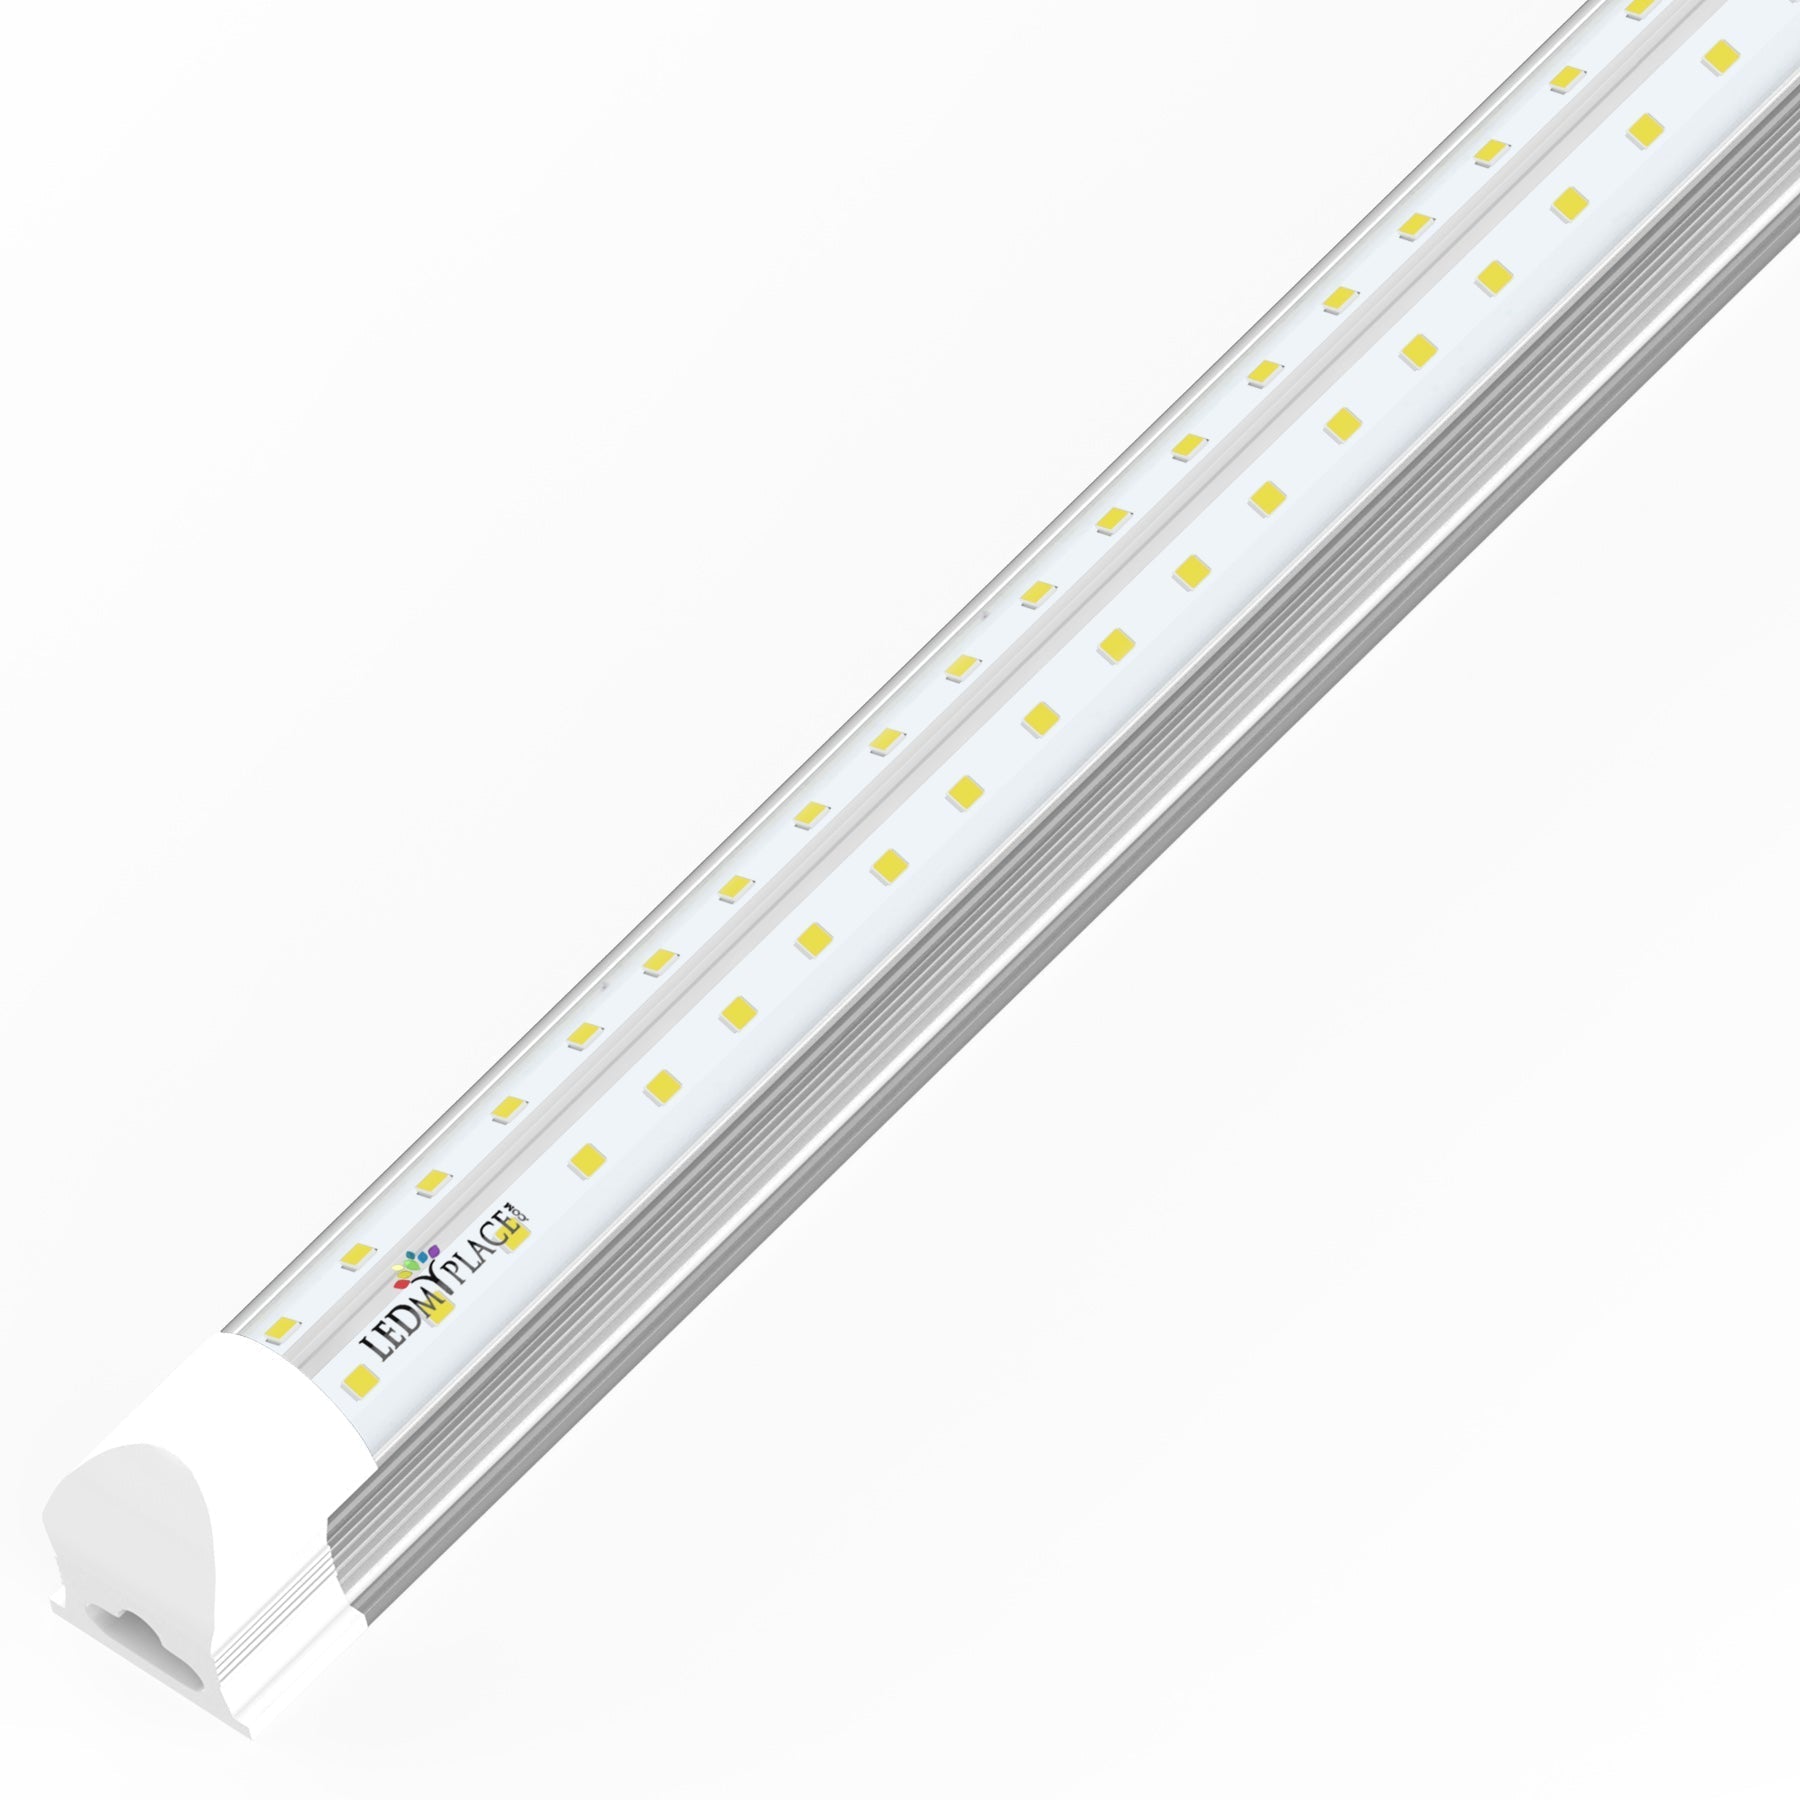 Rod Shape Led Tube Light 20 Watt With Crystal Clear White Color Light Body  Material: Aluminum at Best Price in Guna